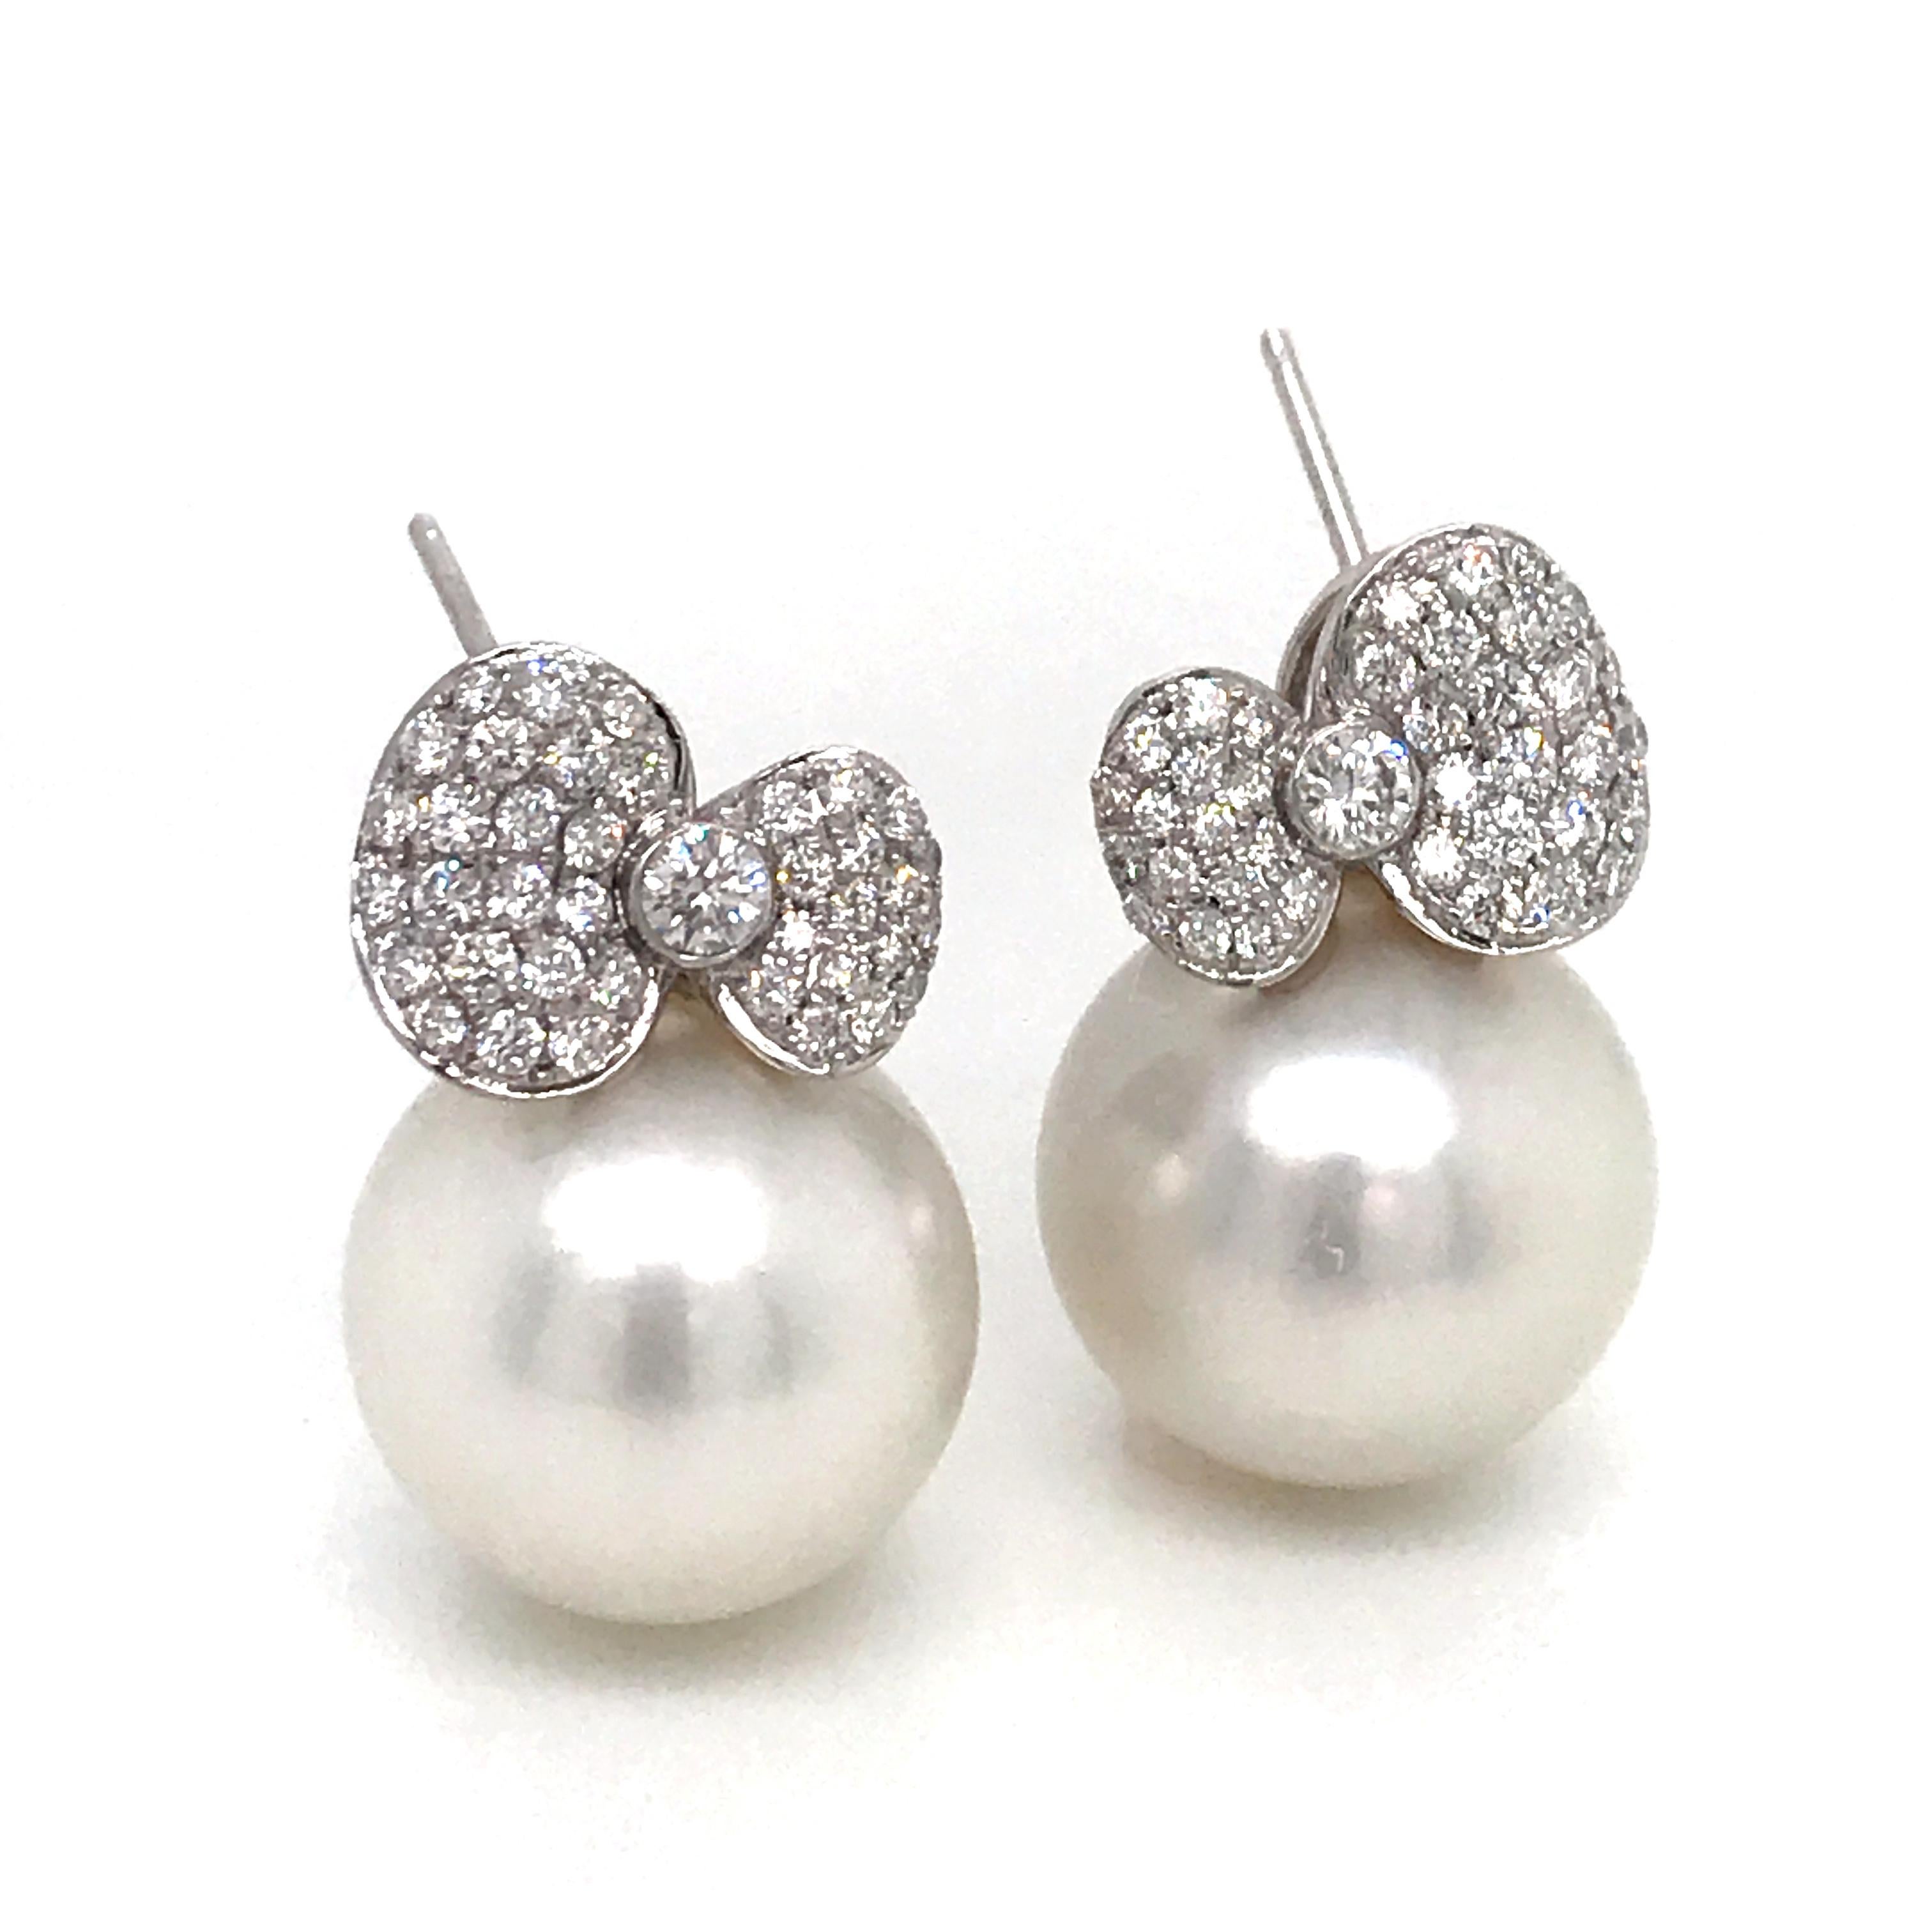 18K White gold earrings featuring two South Sea Pearls measuring 13-14 mm with 76 round brilliants weighing 0.74 carats.
Color G-H
Clarity SI

Diamond bow measures 1/2